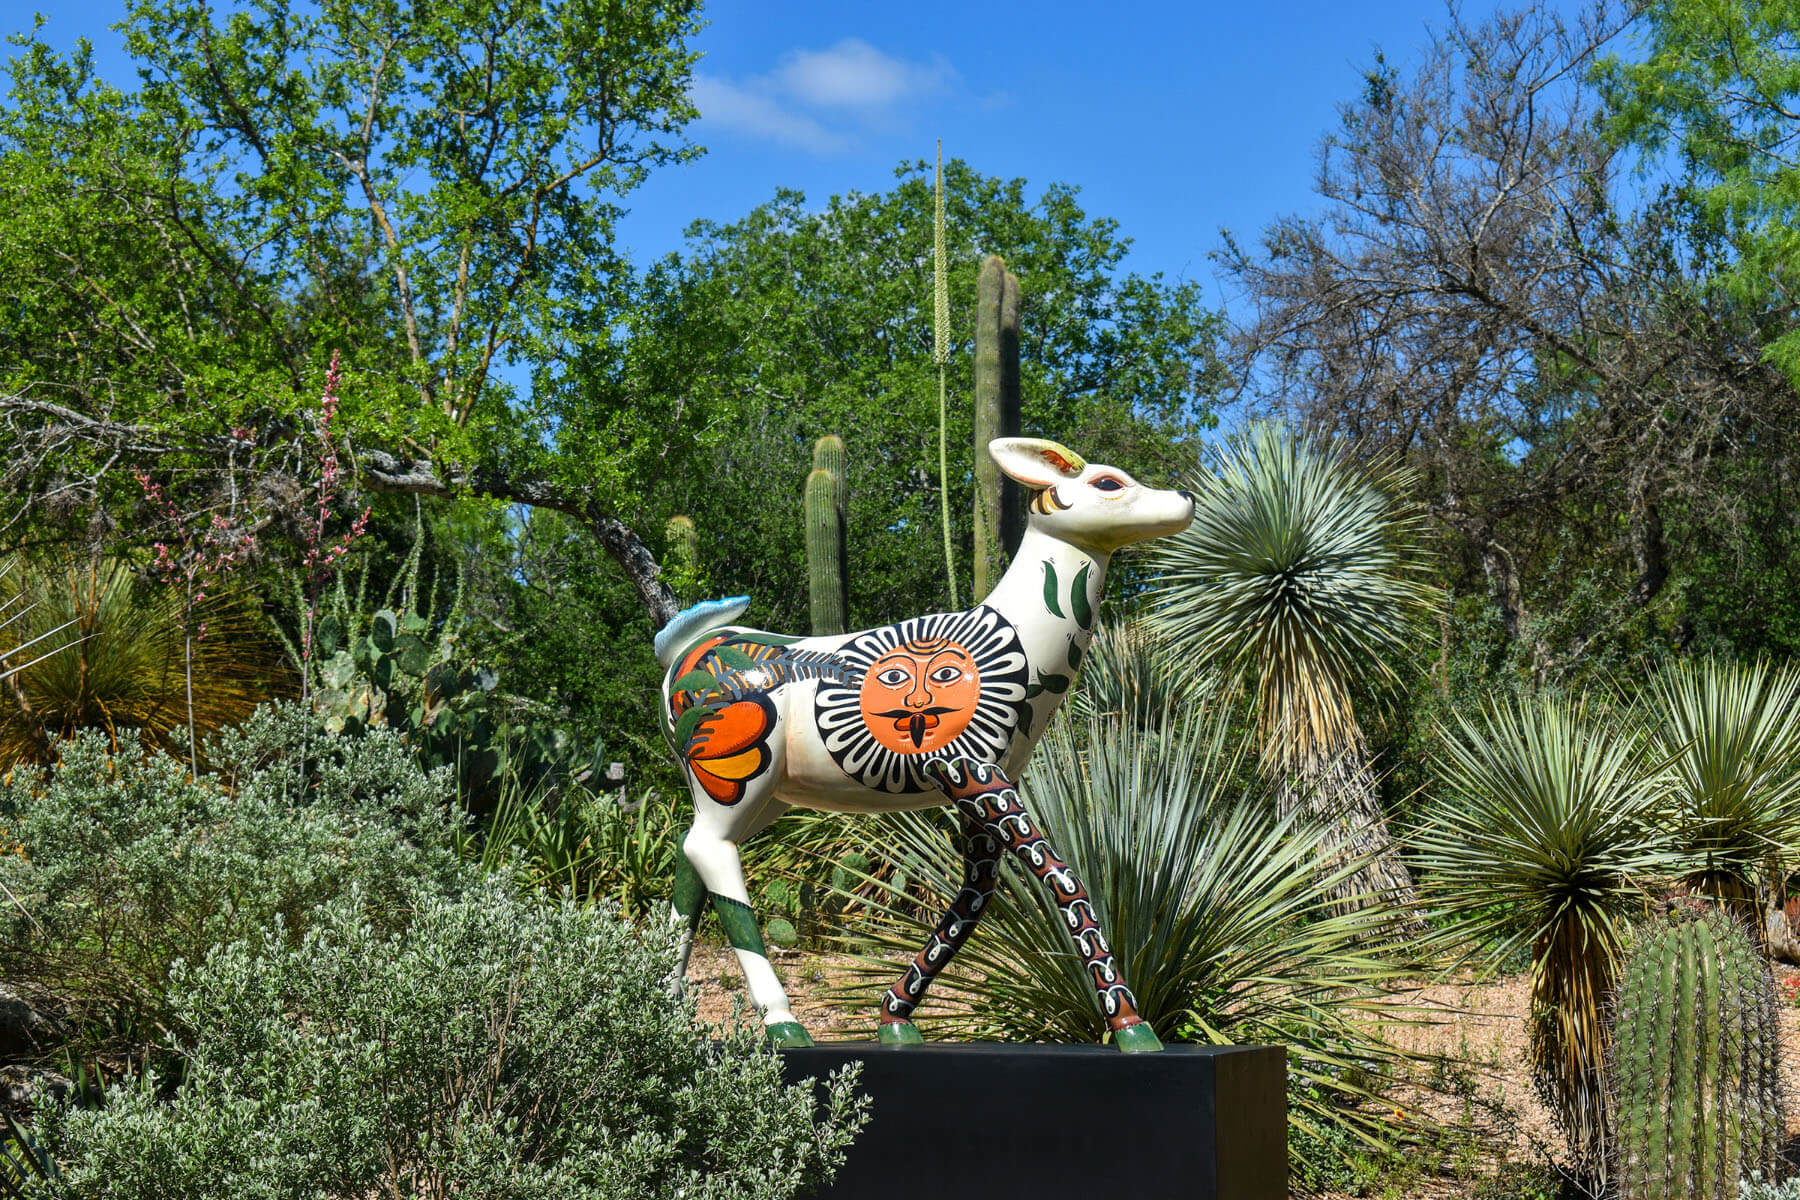 A deer sculpture, part of the sculptural series of animals that inspired Kahlo's work. Photo courtesy of San Antonio Botanical Garden.